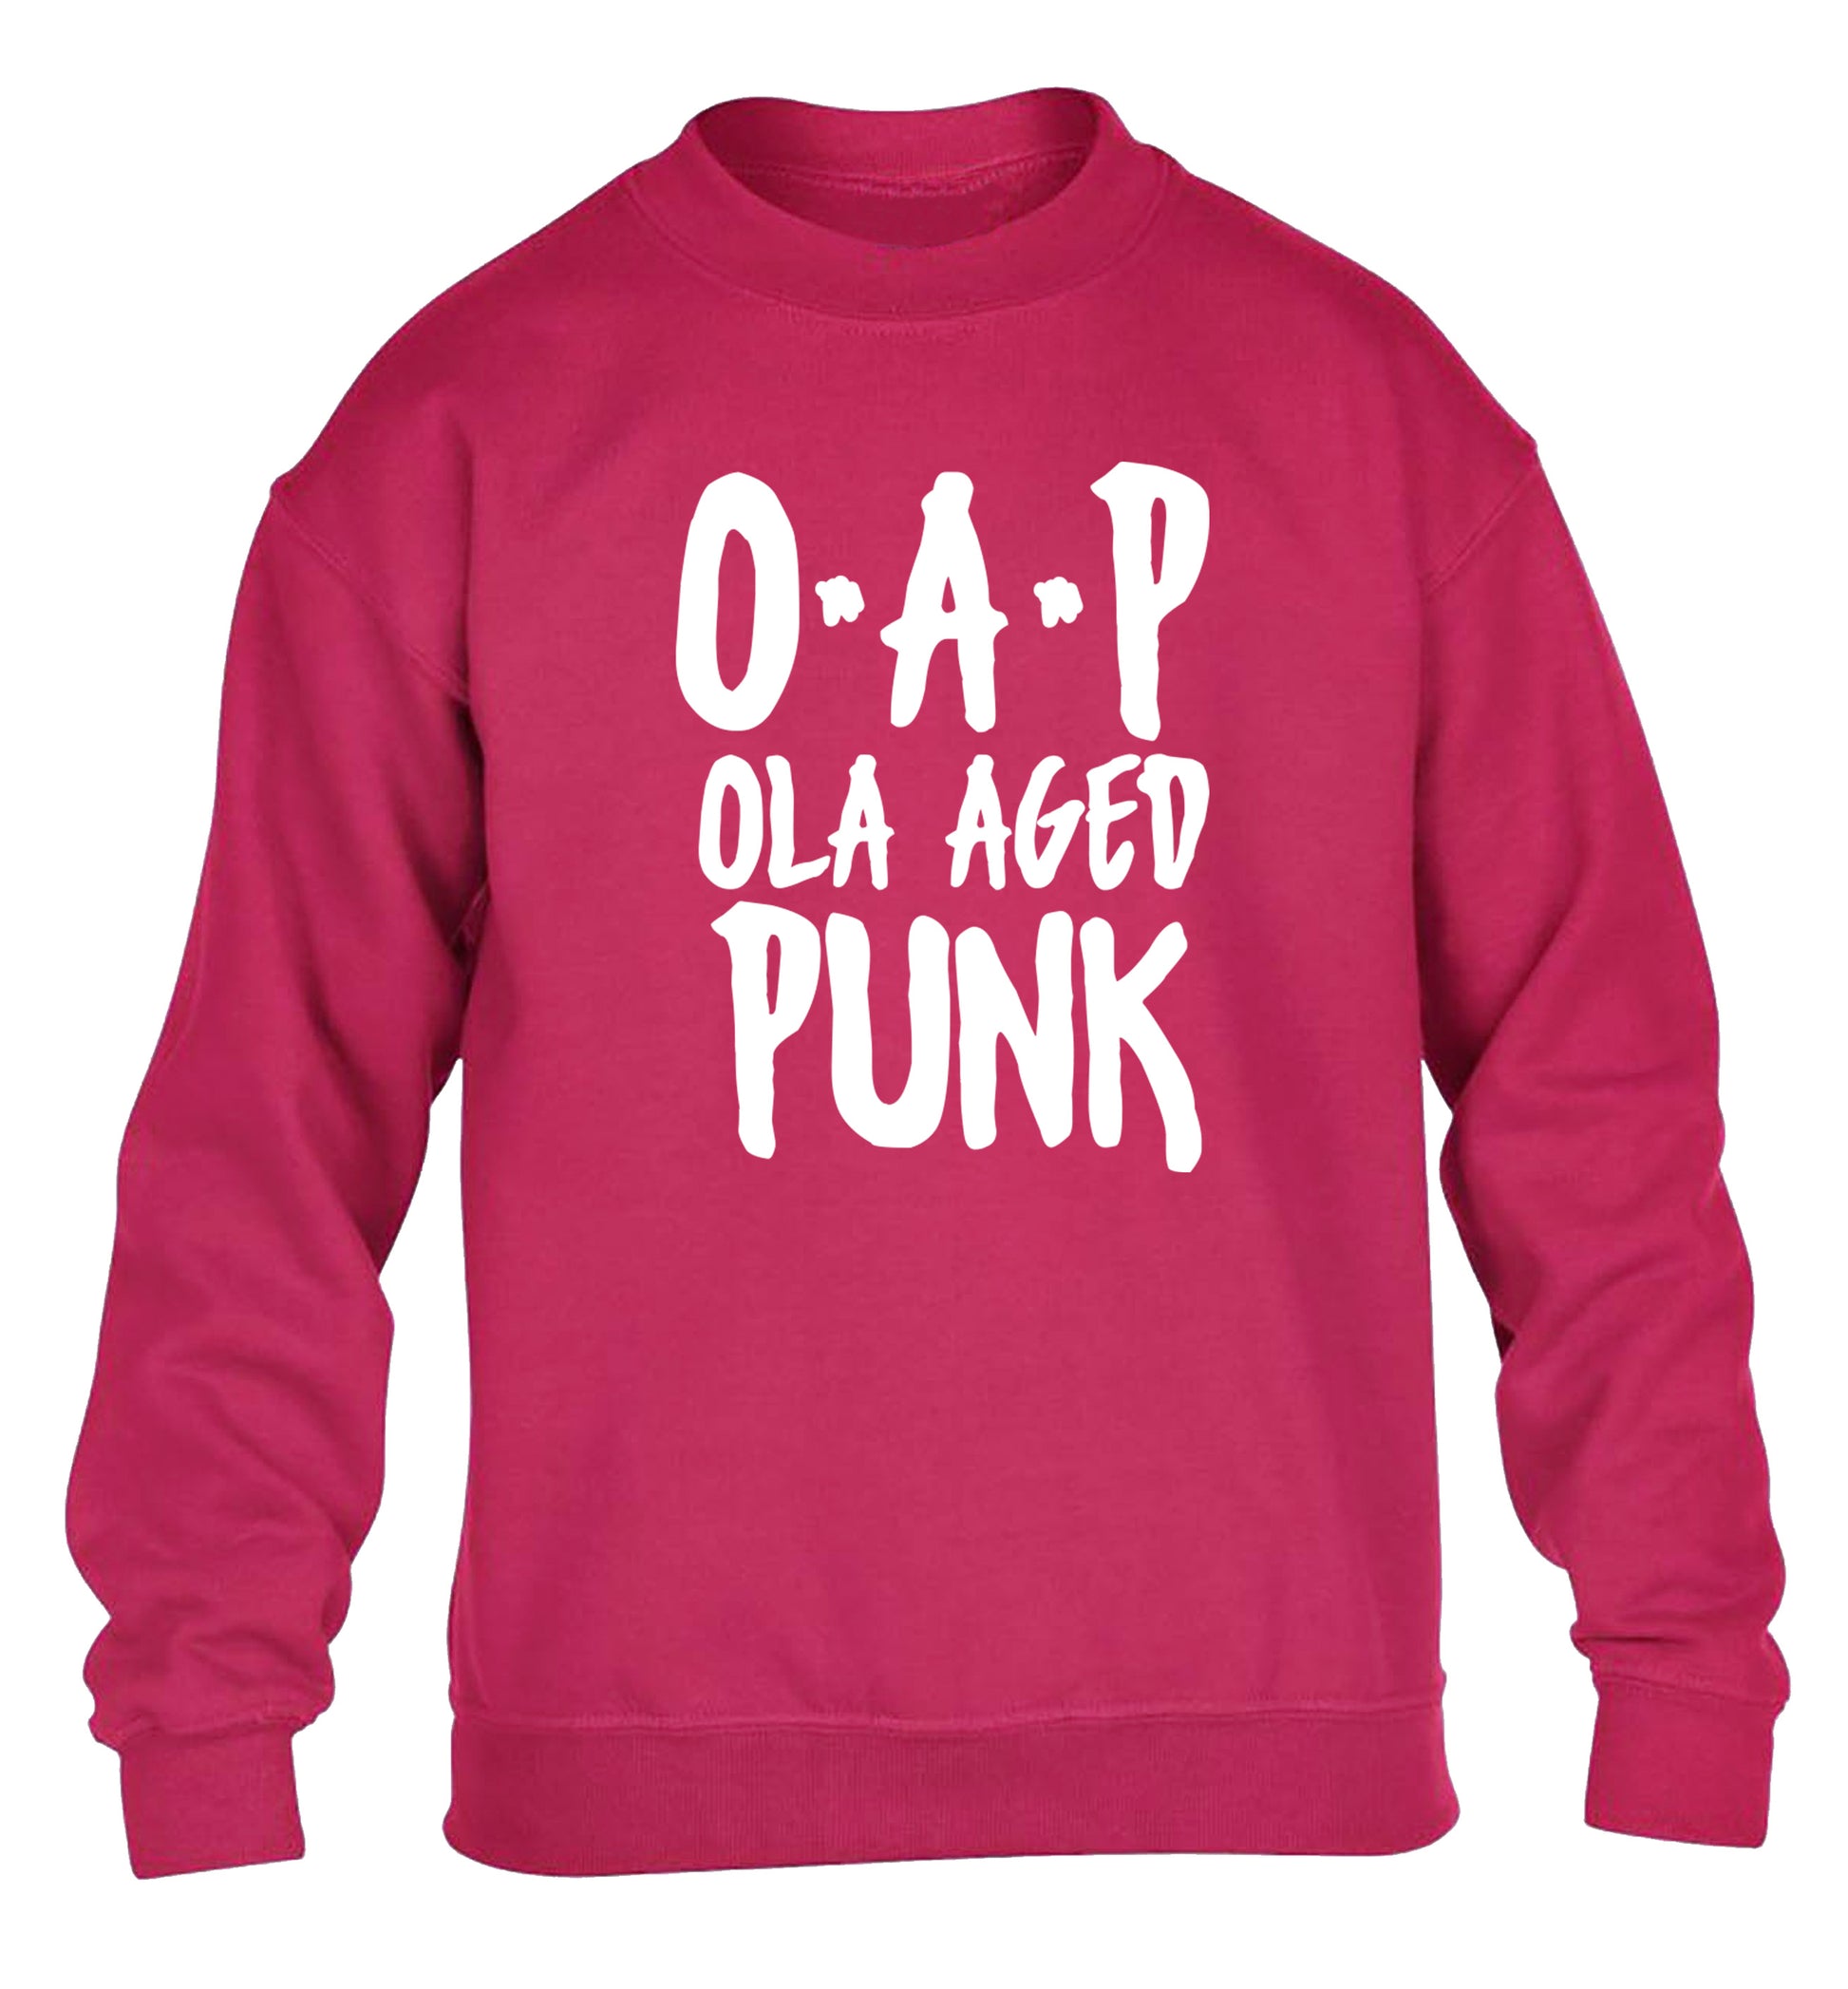 O.A.P Old Aged Punk children's pink sweater 12-13 Years